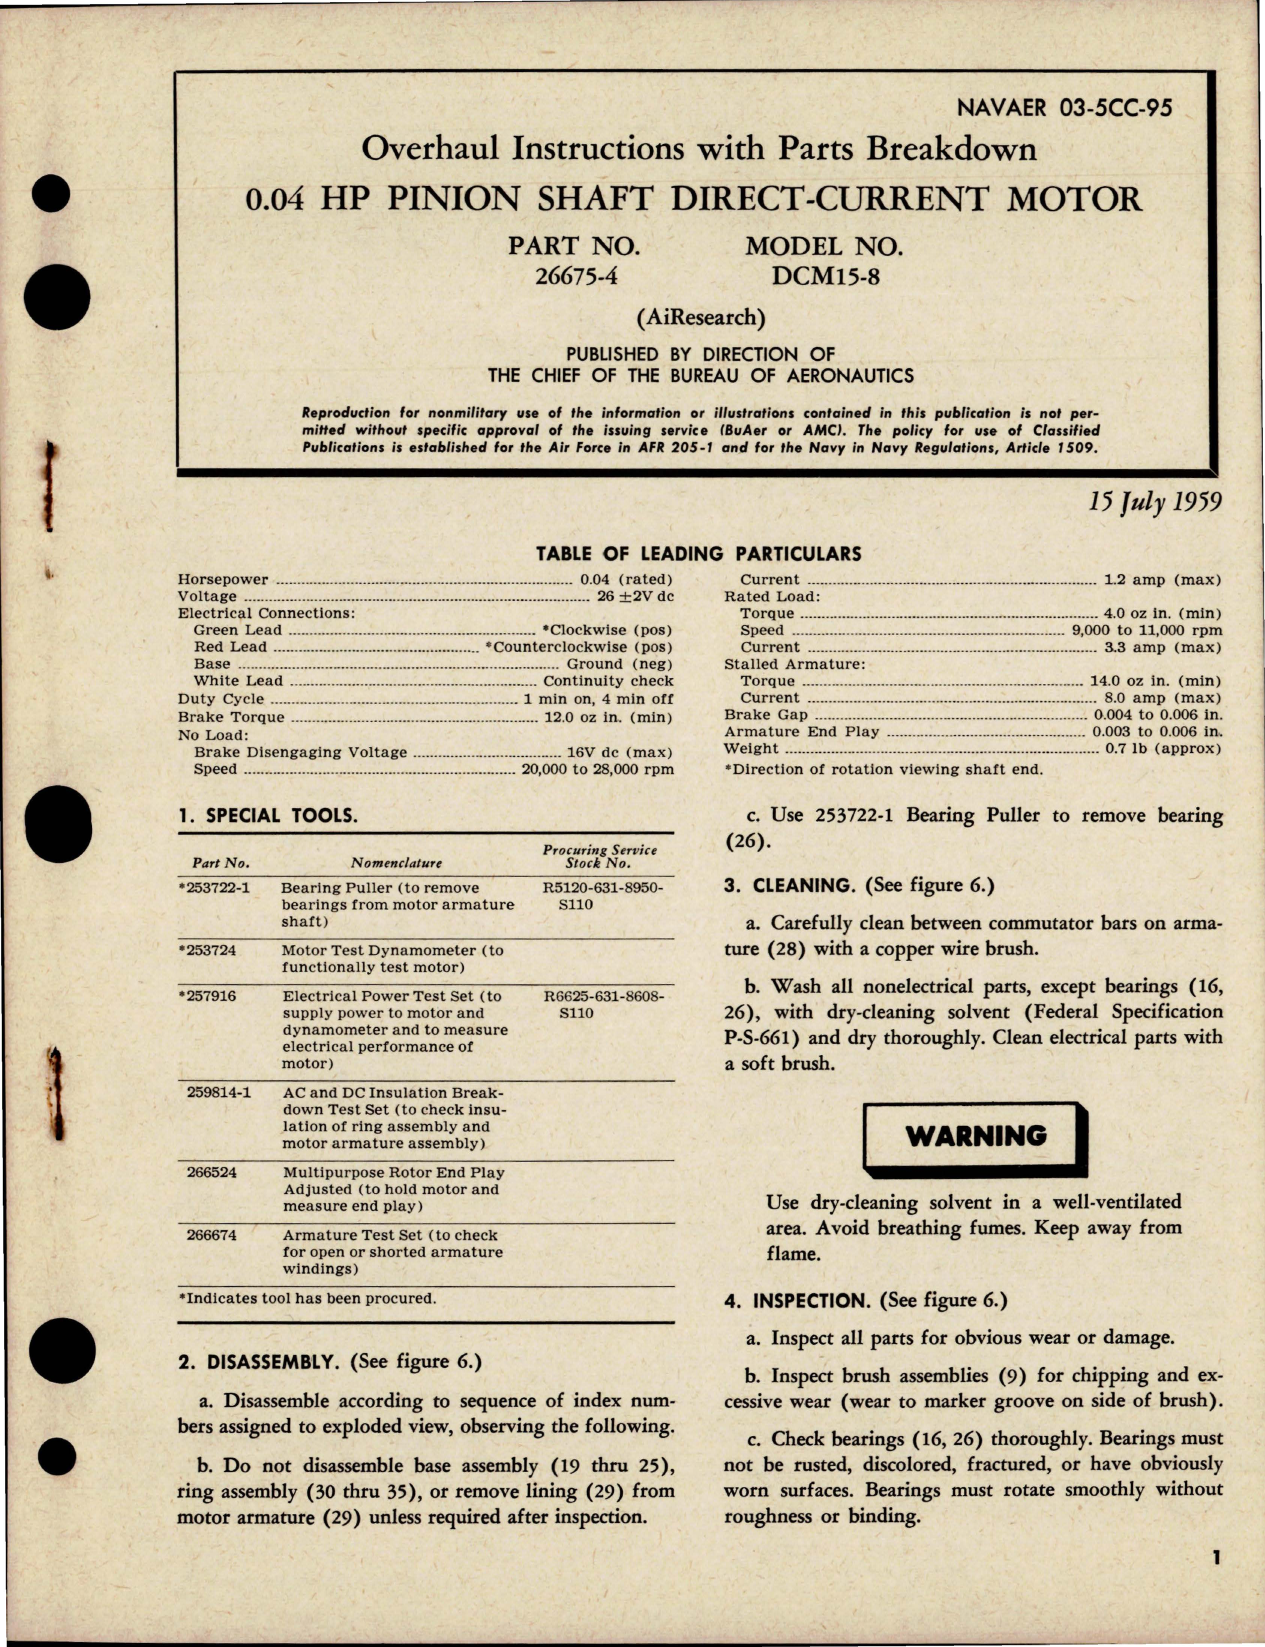 Sample page 1 from AirCorps Library document: Overhaul Instructions with Parts Breakdown for Pinion Shaft Direct Current Motor 0.04 HP - Part 26675-4 - Model DCM15-8